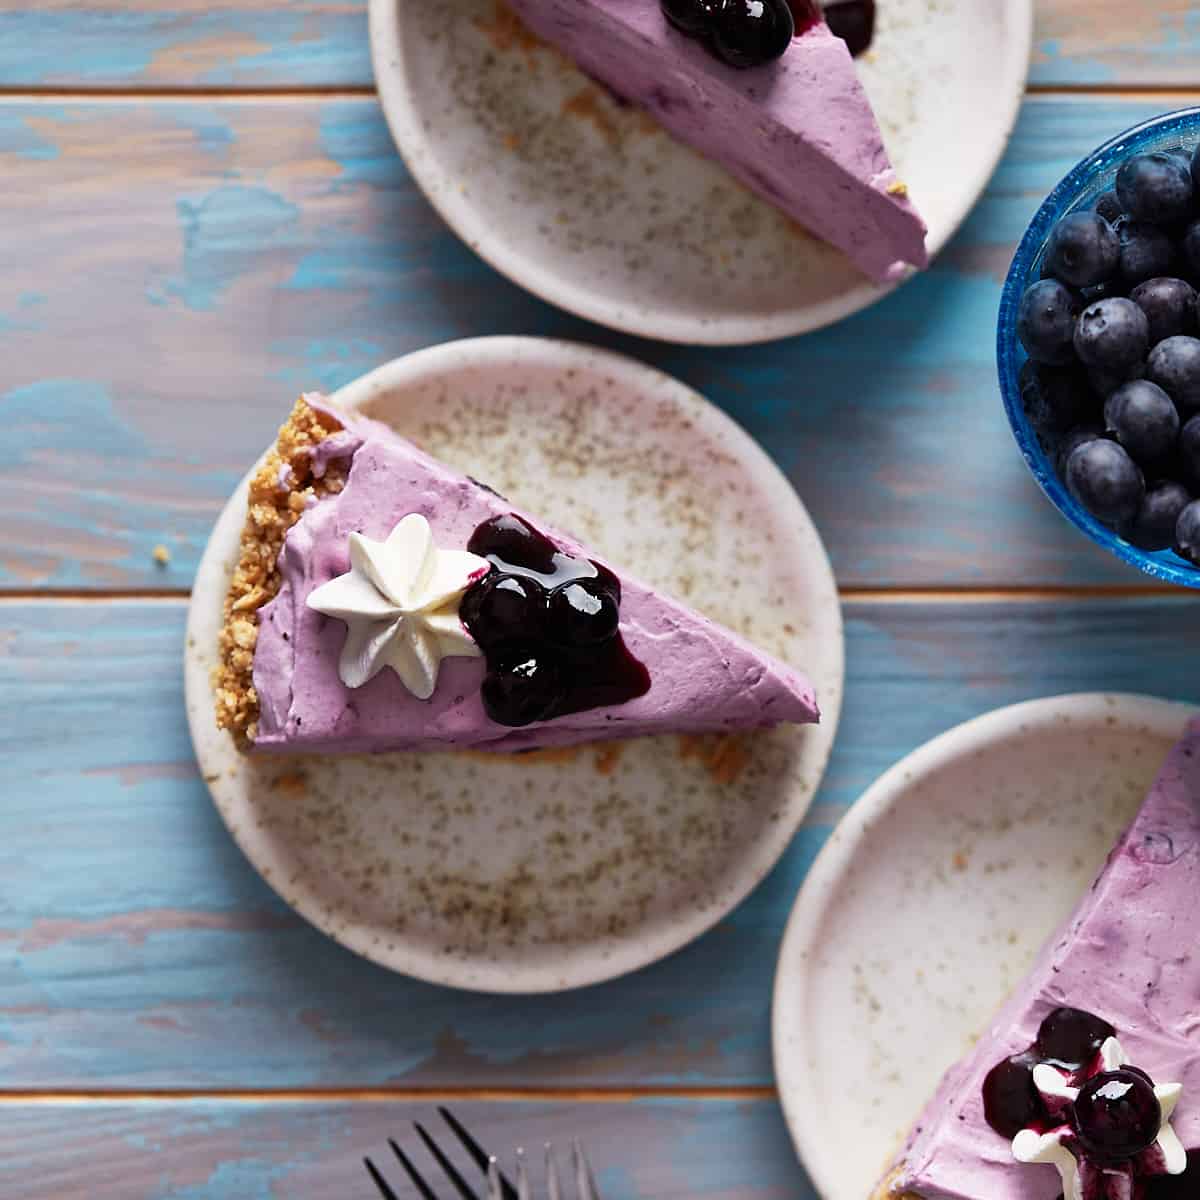 Image of blueberry cheesecakes on plates, with dollops of whipped cream atop each. There is a fork on the bottom and a bowl of blueberries on the right.